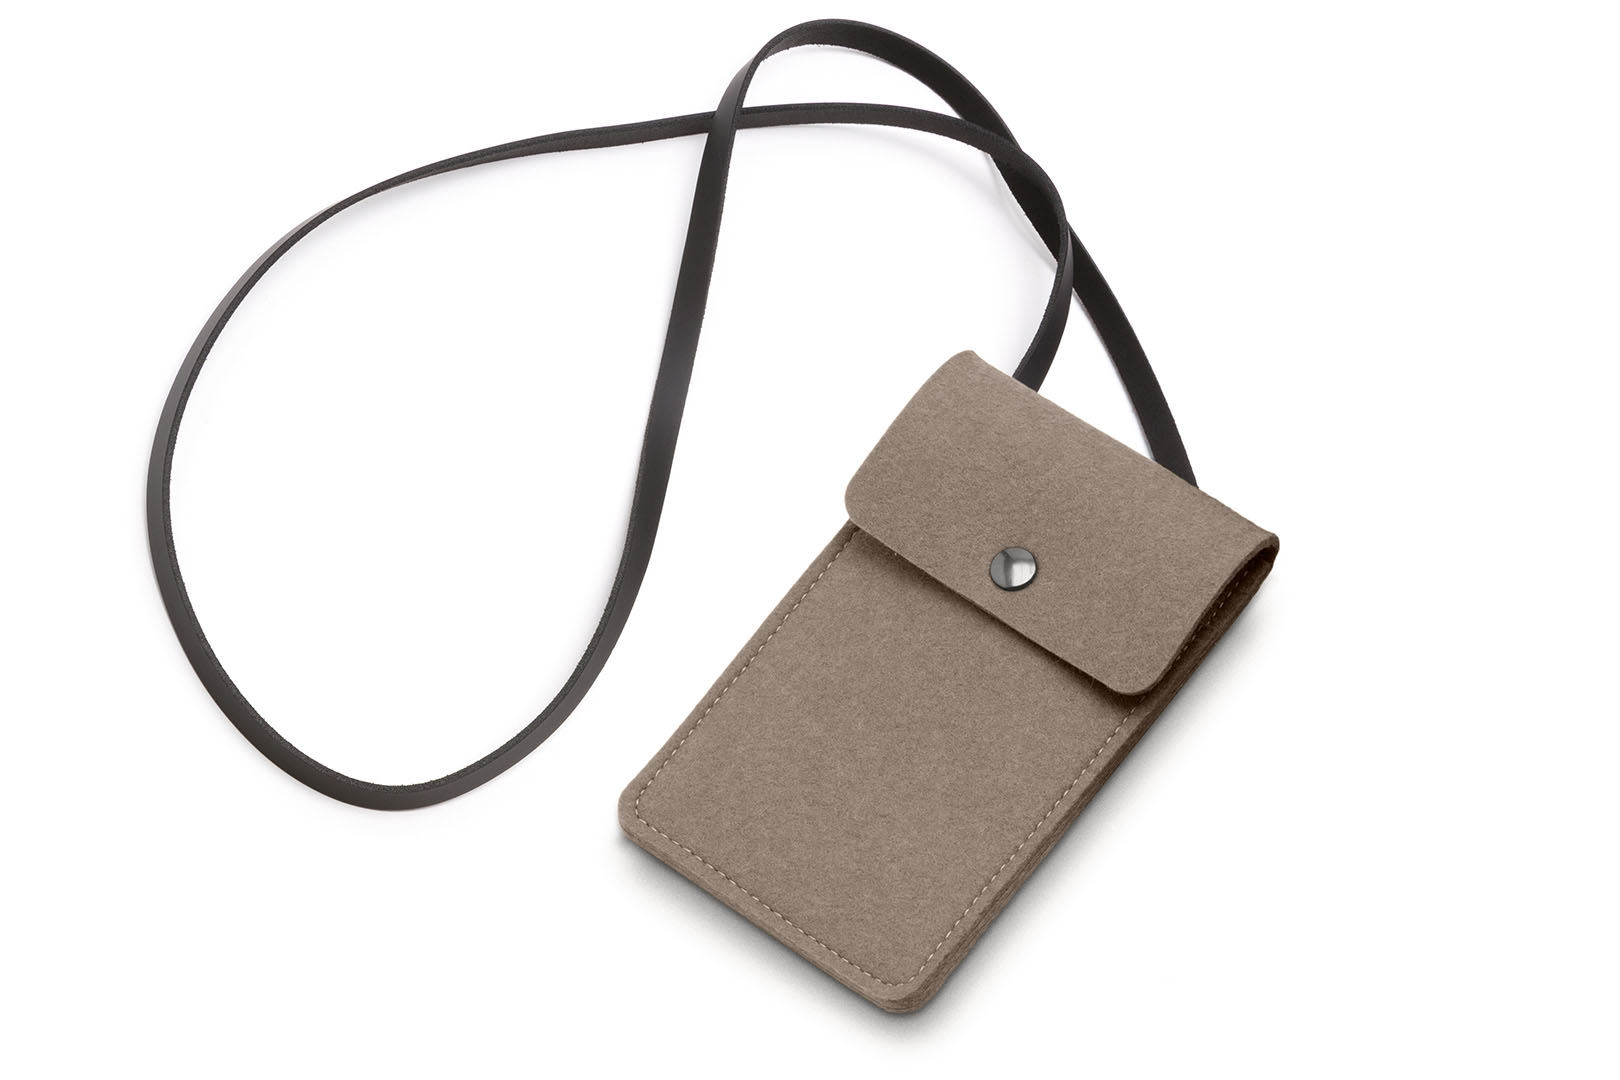 HEY-Sign Smart Bag in der Farbe "Taupe"